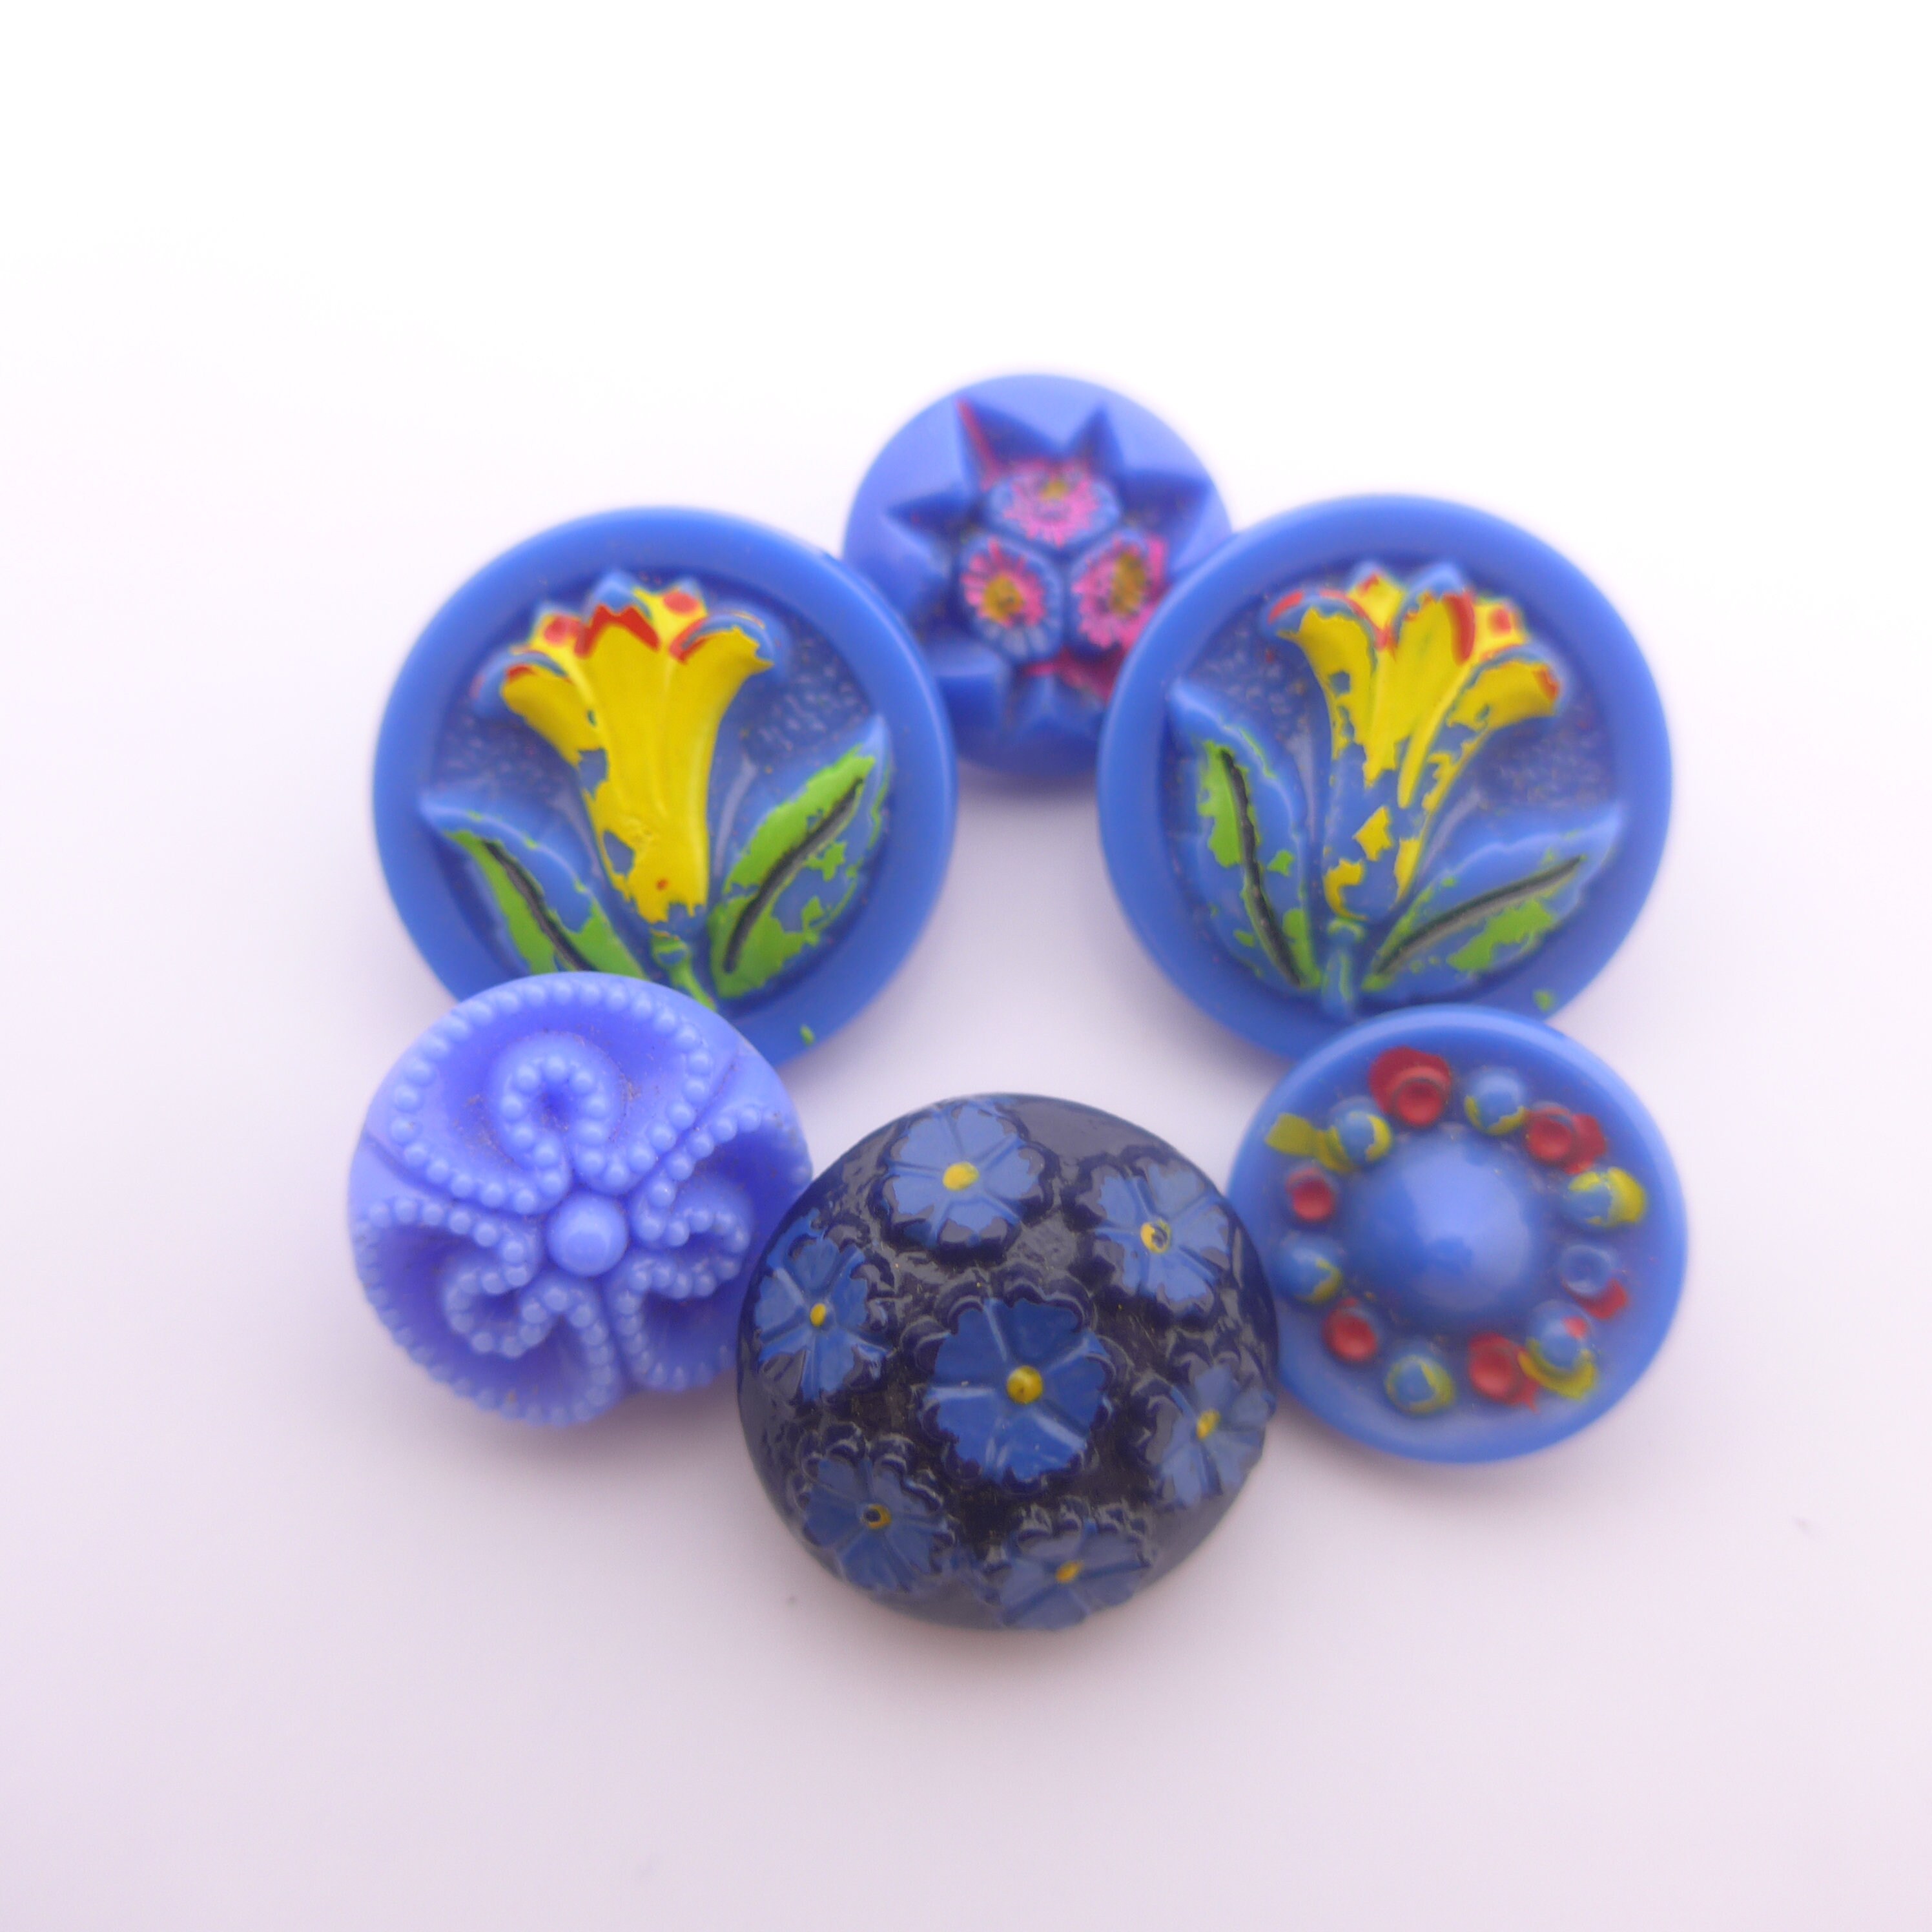 Vintage Czech Glass 23 mm Abstract Rose and Blue Floral Button with Gold accents 